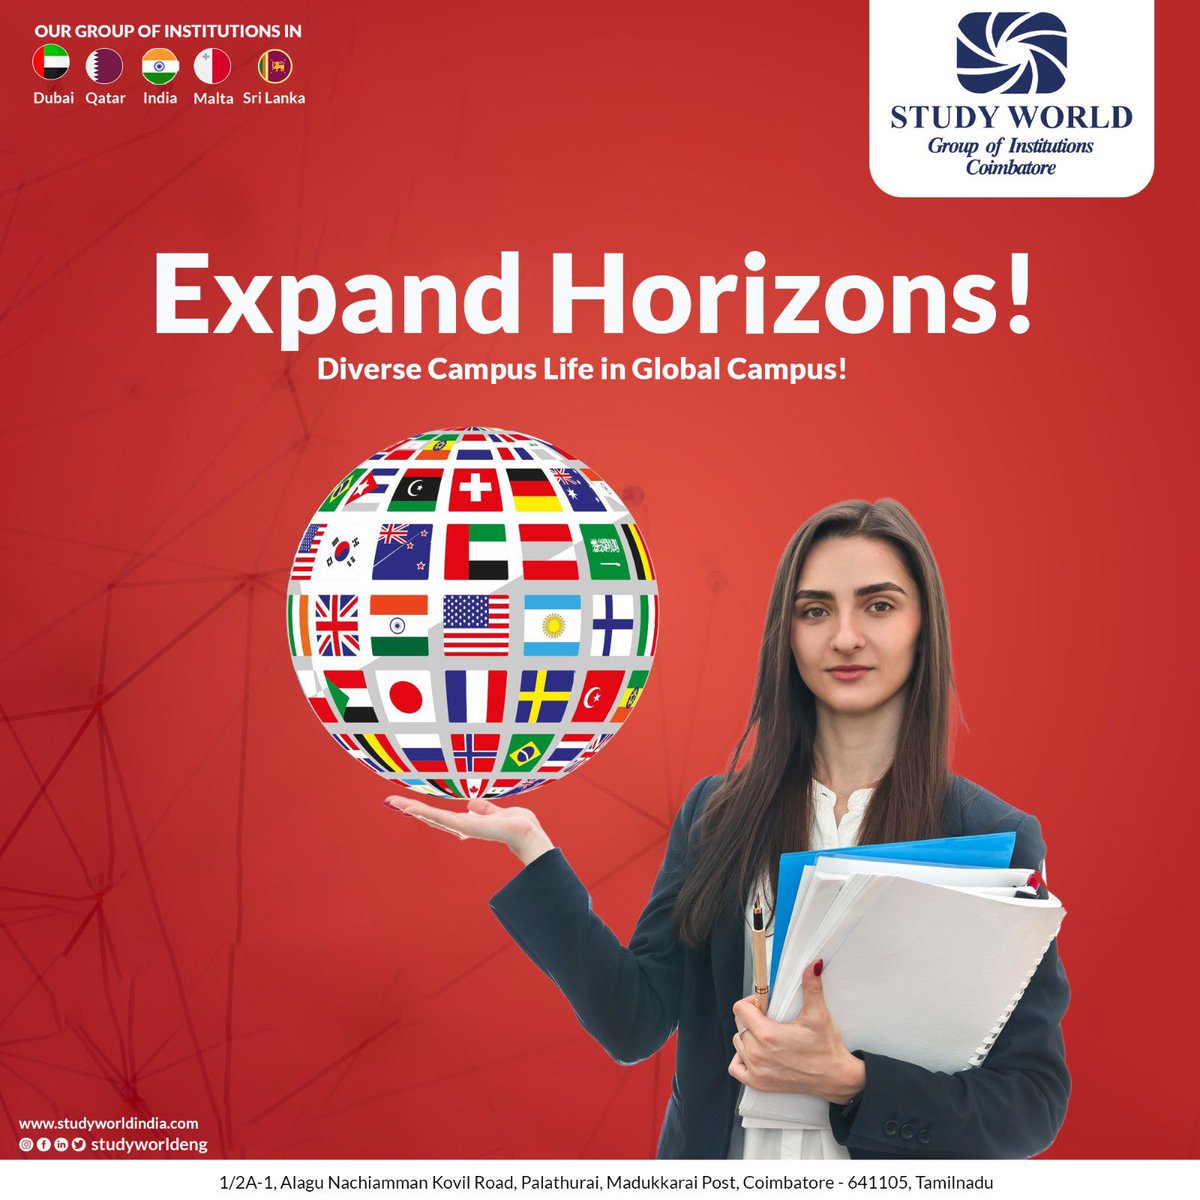 Explore an #internationalcampus experience focusing on diversity, innovation and unique programs. Get access to world-class amenities and advanced learning methodologies.

#studyworldgroupofinstitutions 
#bestcolleges 

#coimbatore #globalcampus #engineeringcolleges #studyworld